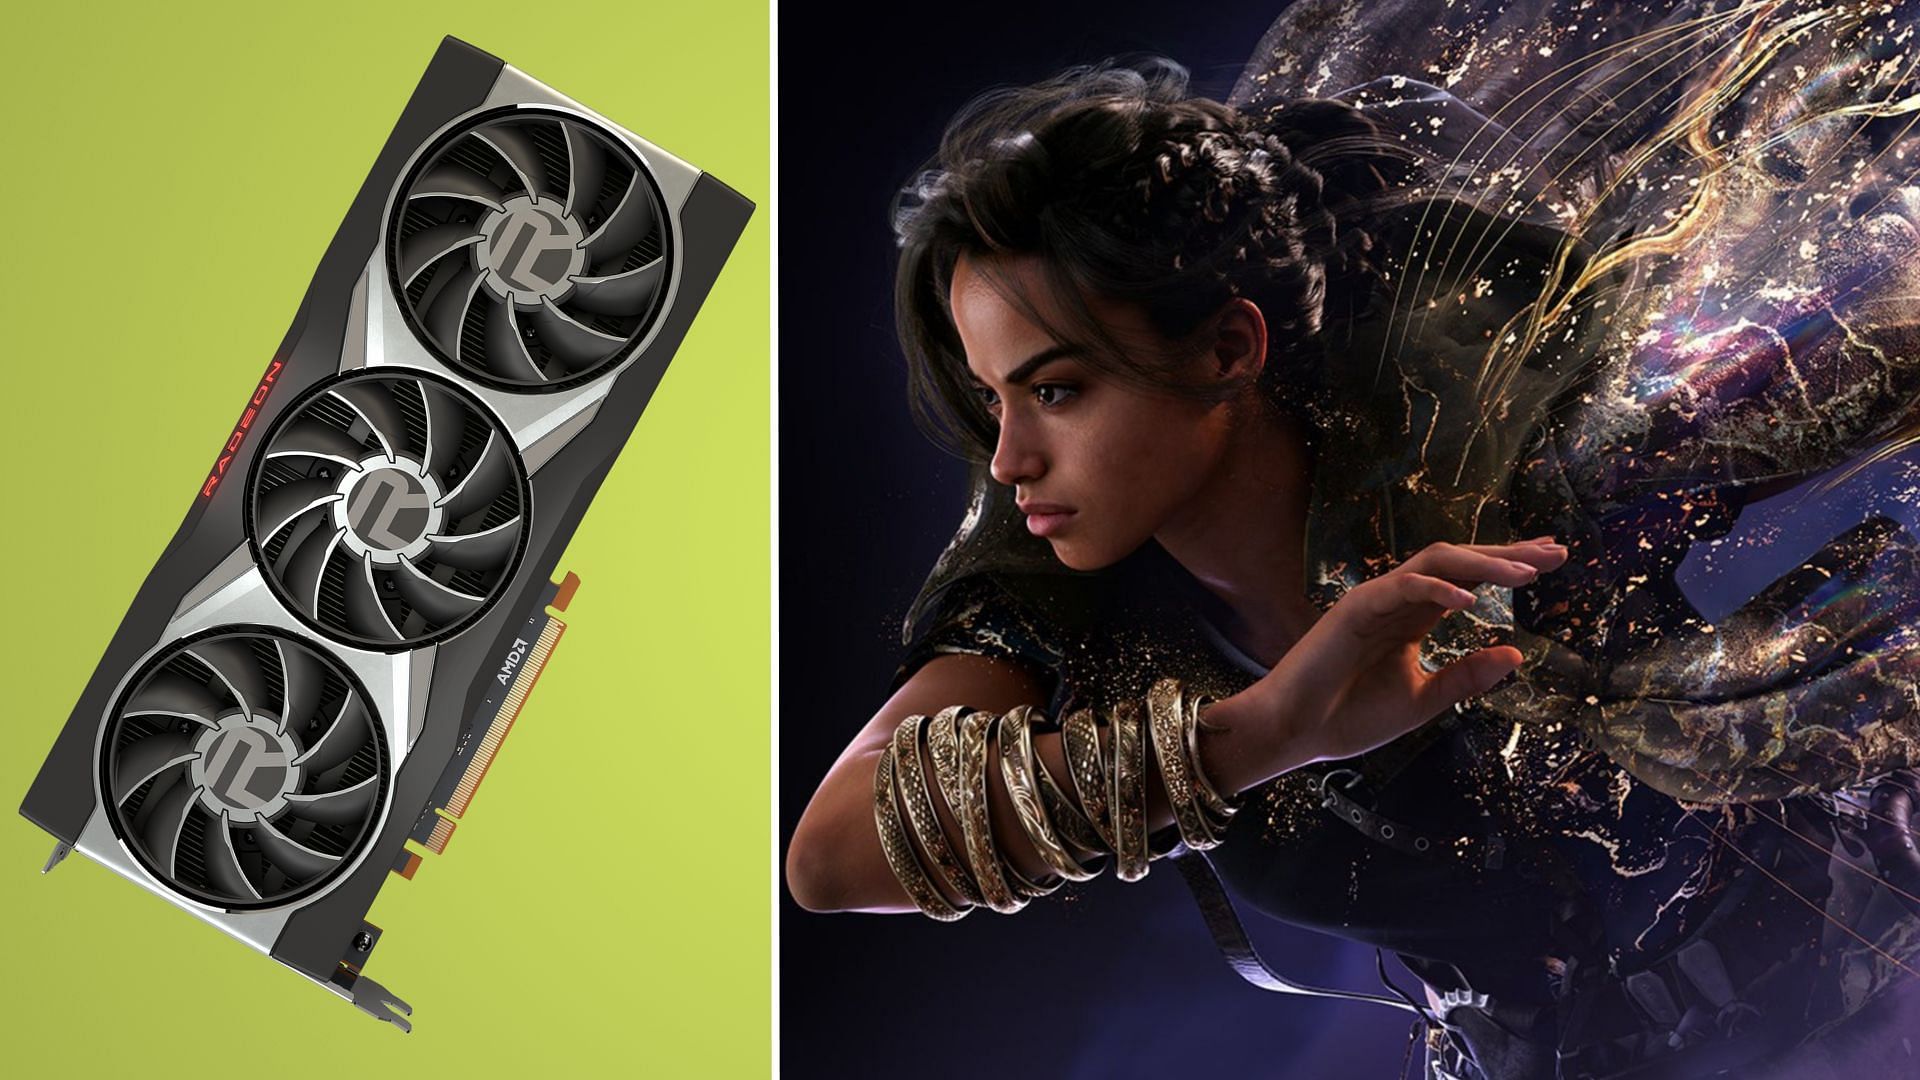 The AMD Radeon RX 6800 XT is one of the best cards for Forspoken (Image via Sportskeeda)